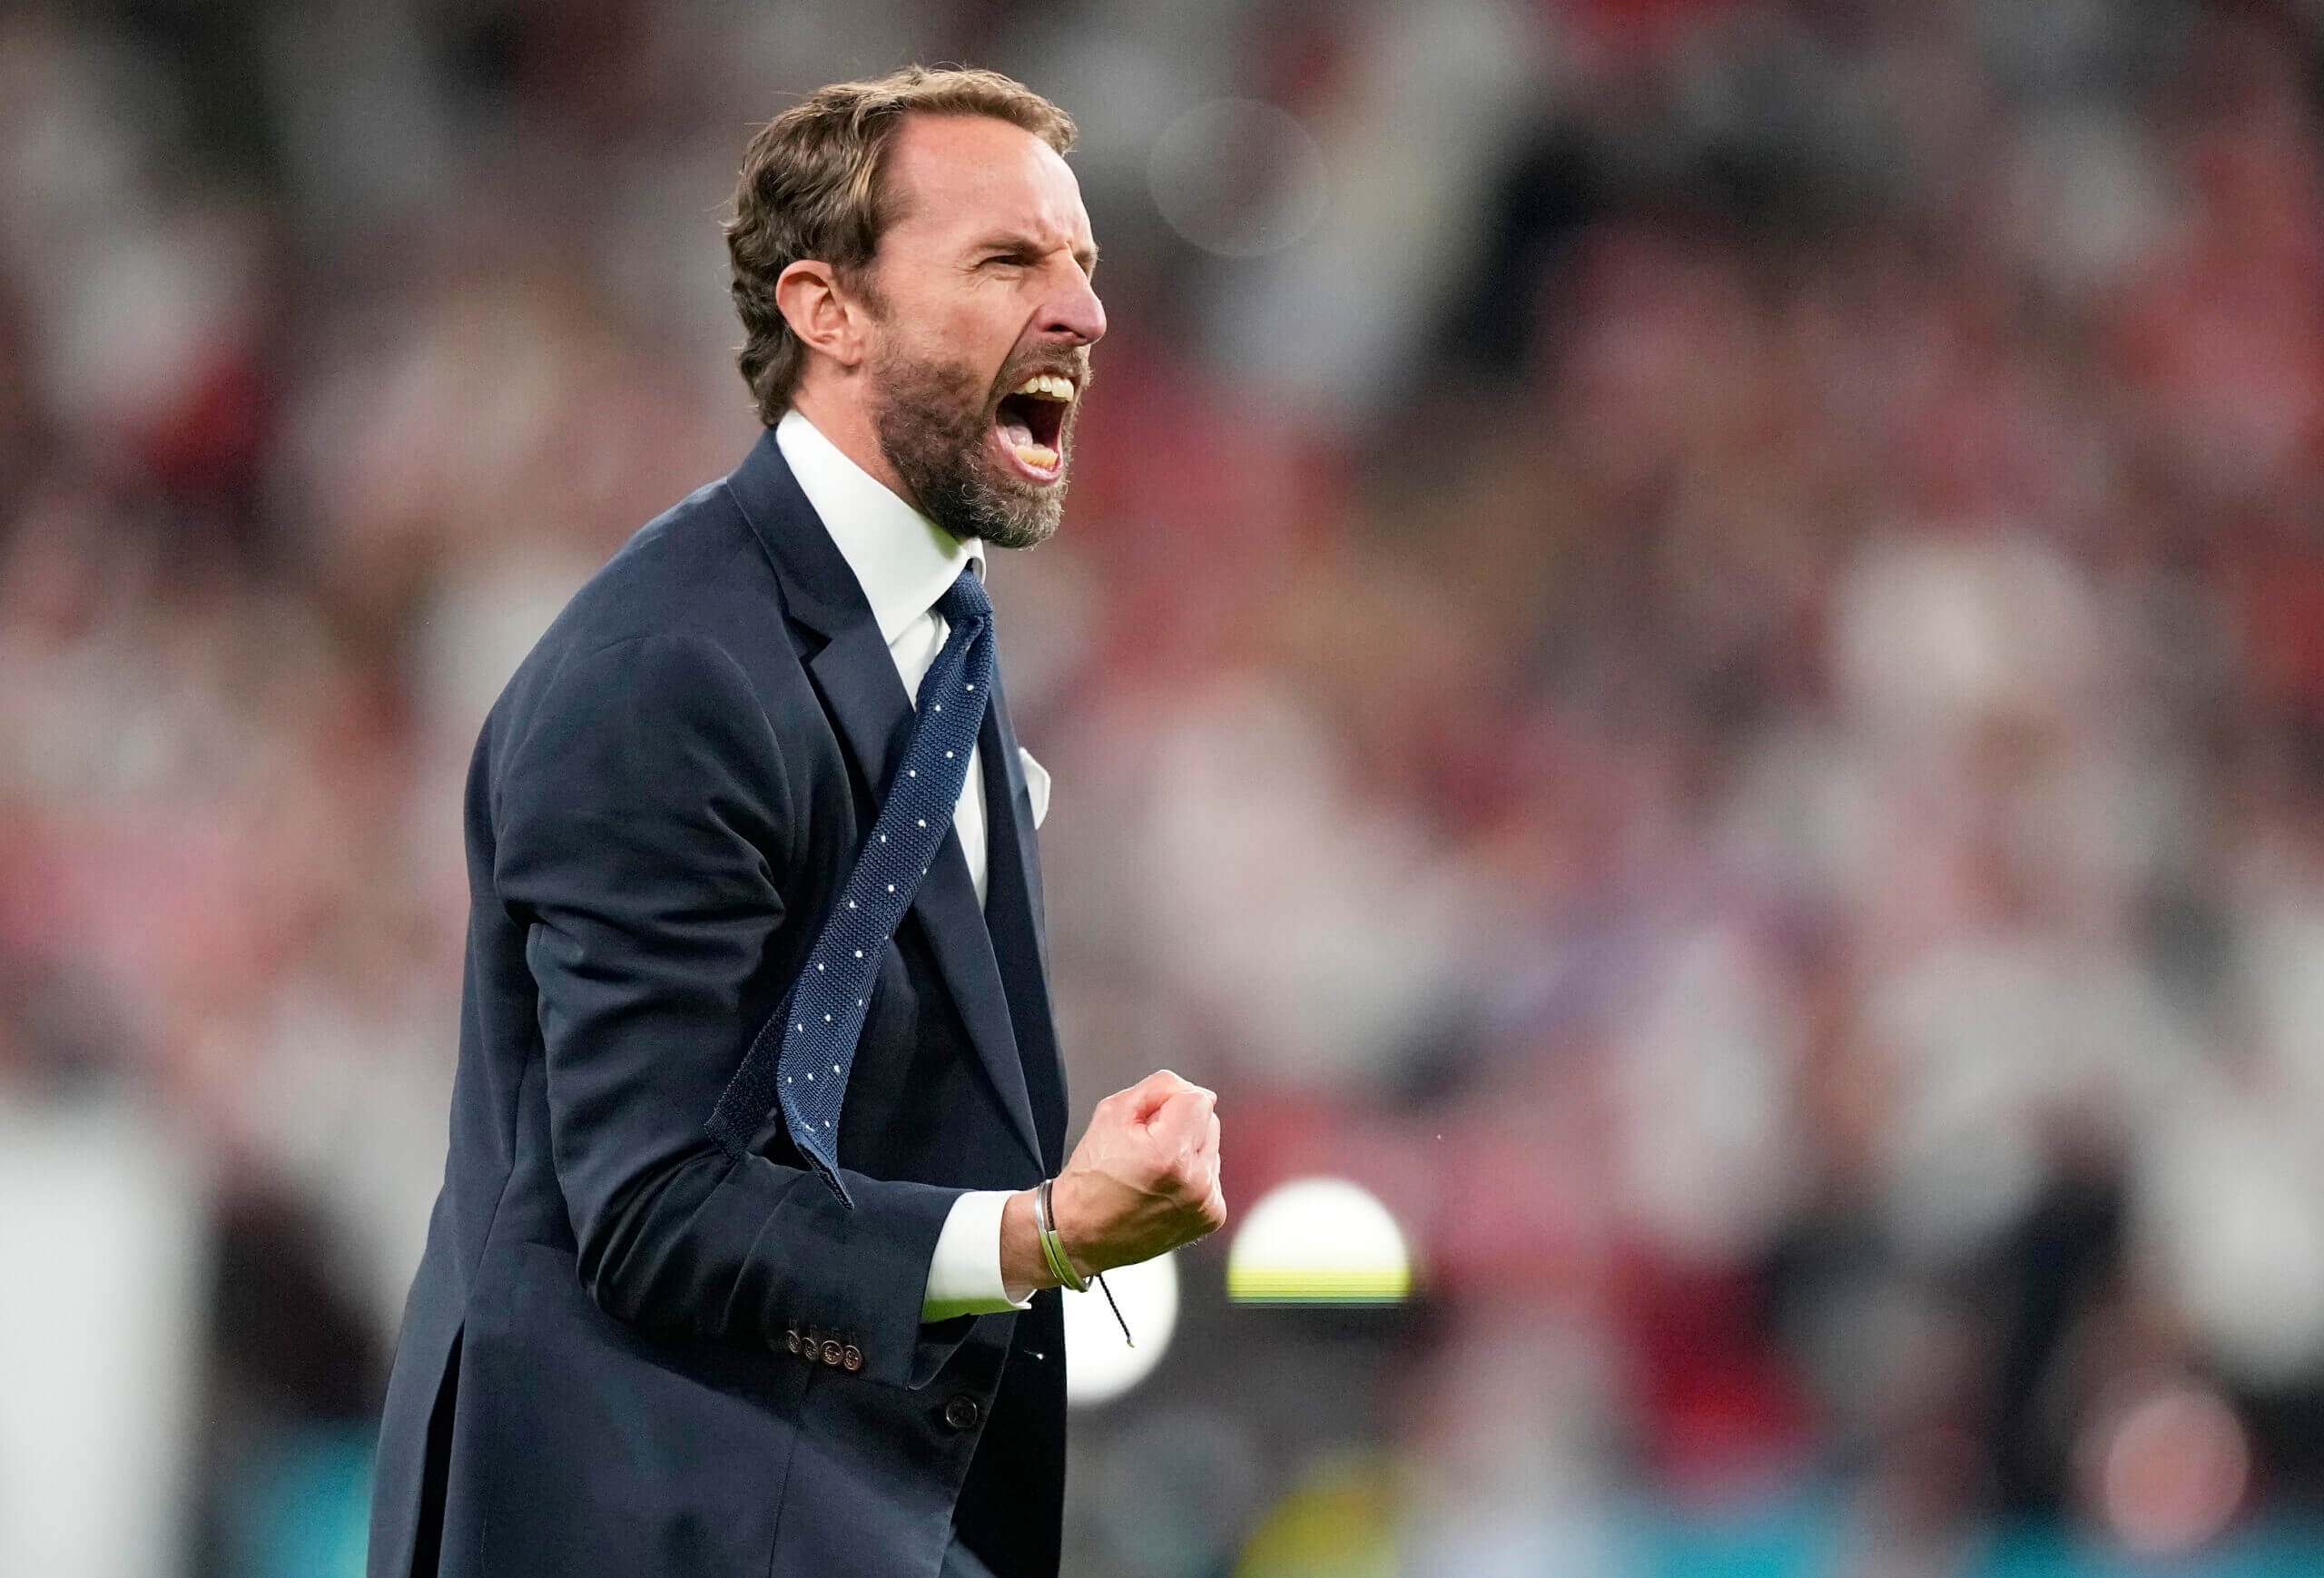 A dispassionate review of Gareth Southgate's eight years in charge of England